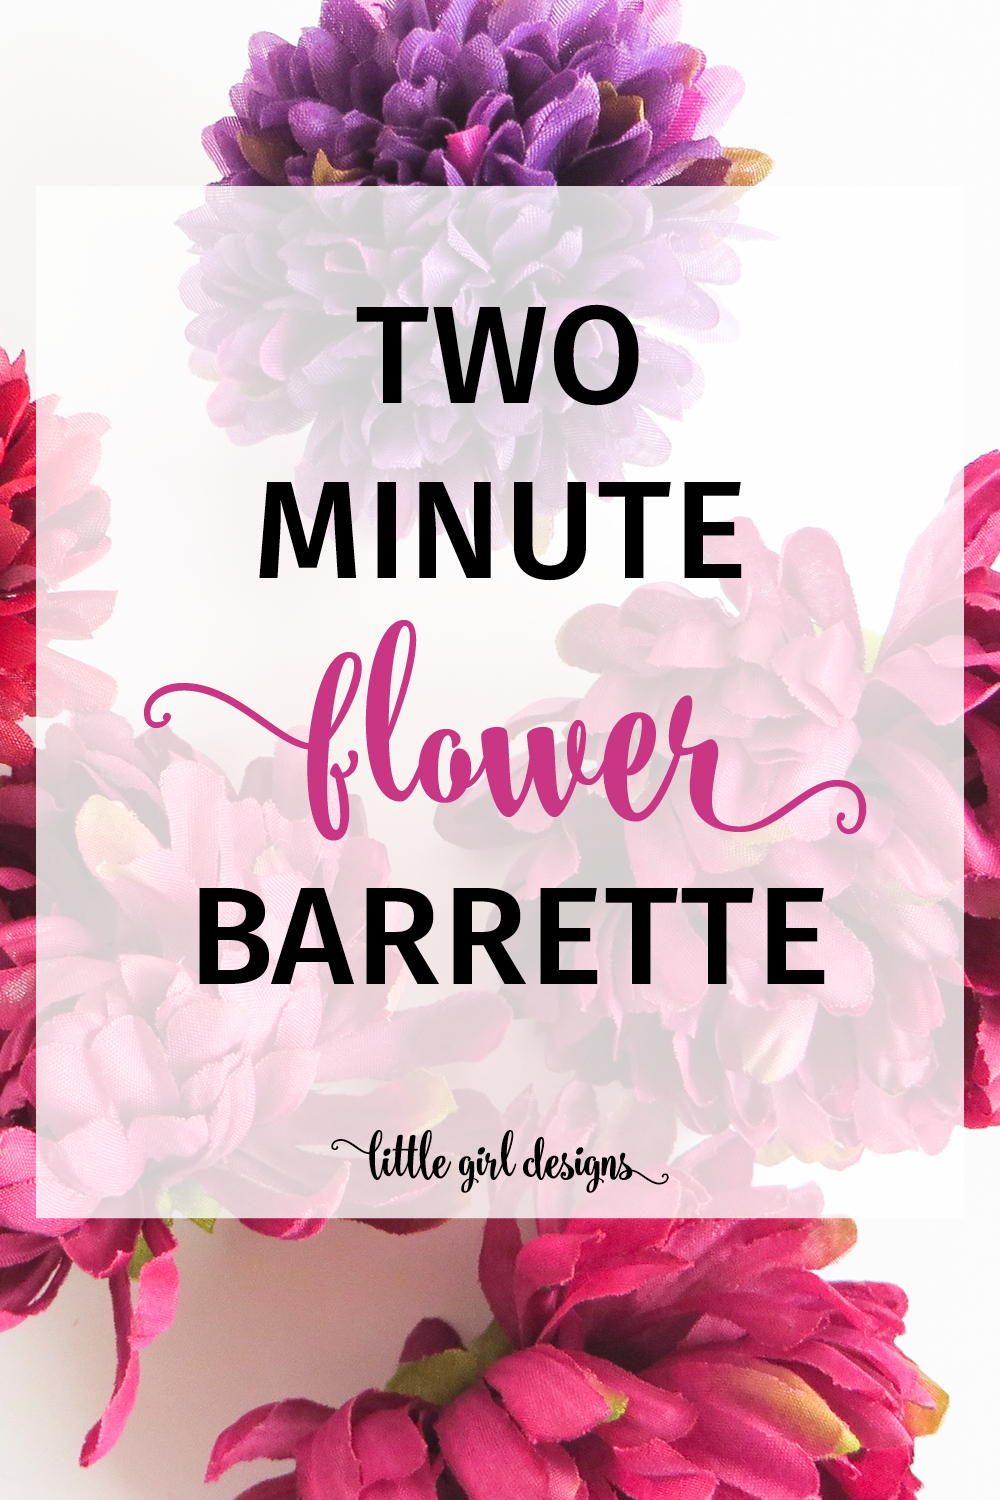 How to Make a Simple Flower Barrette